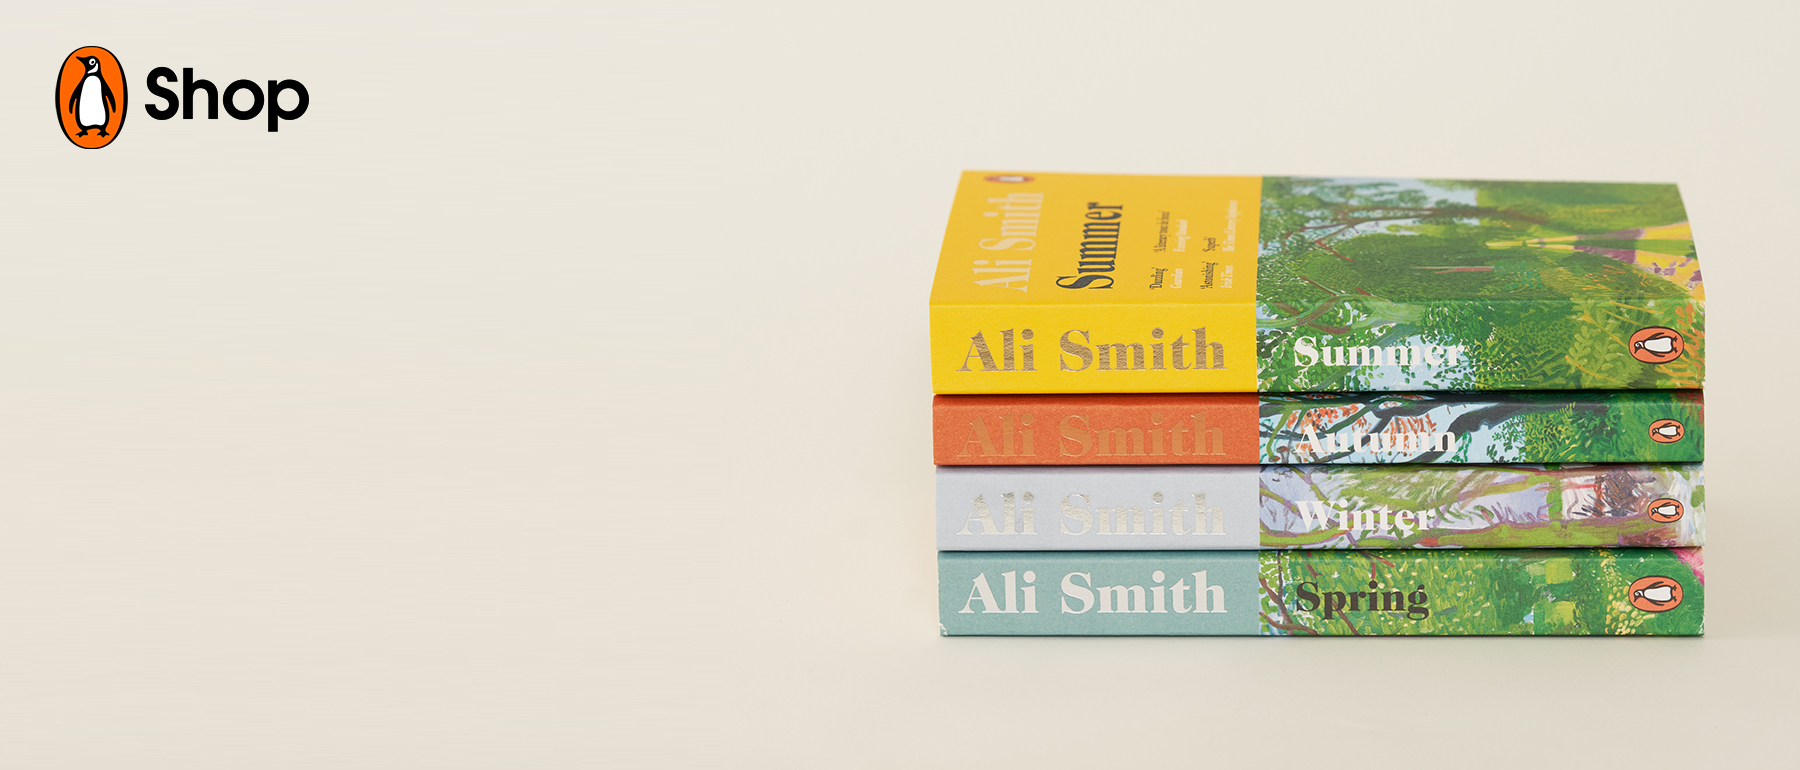 Ali Smith paperbacks in a stack on white background